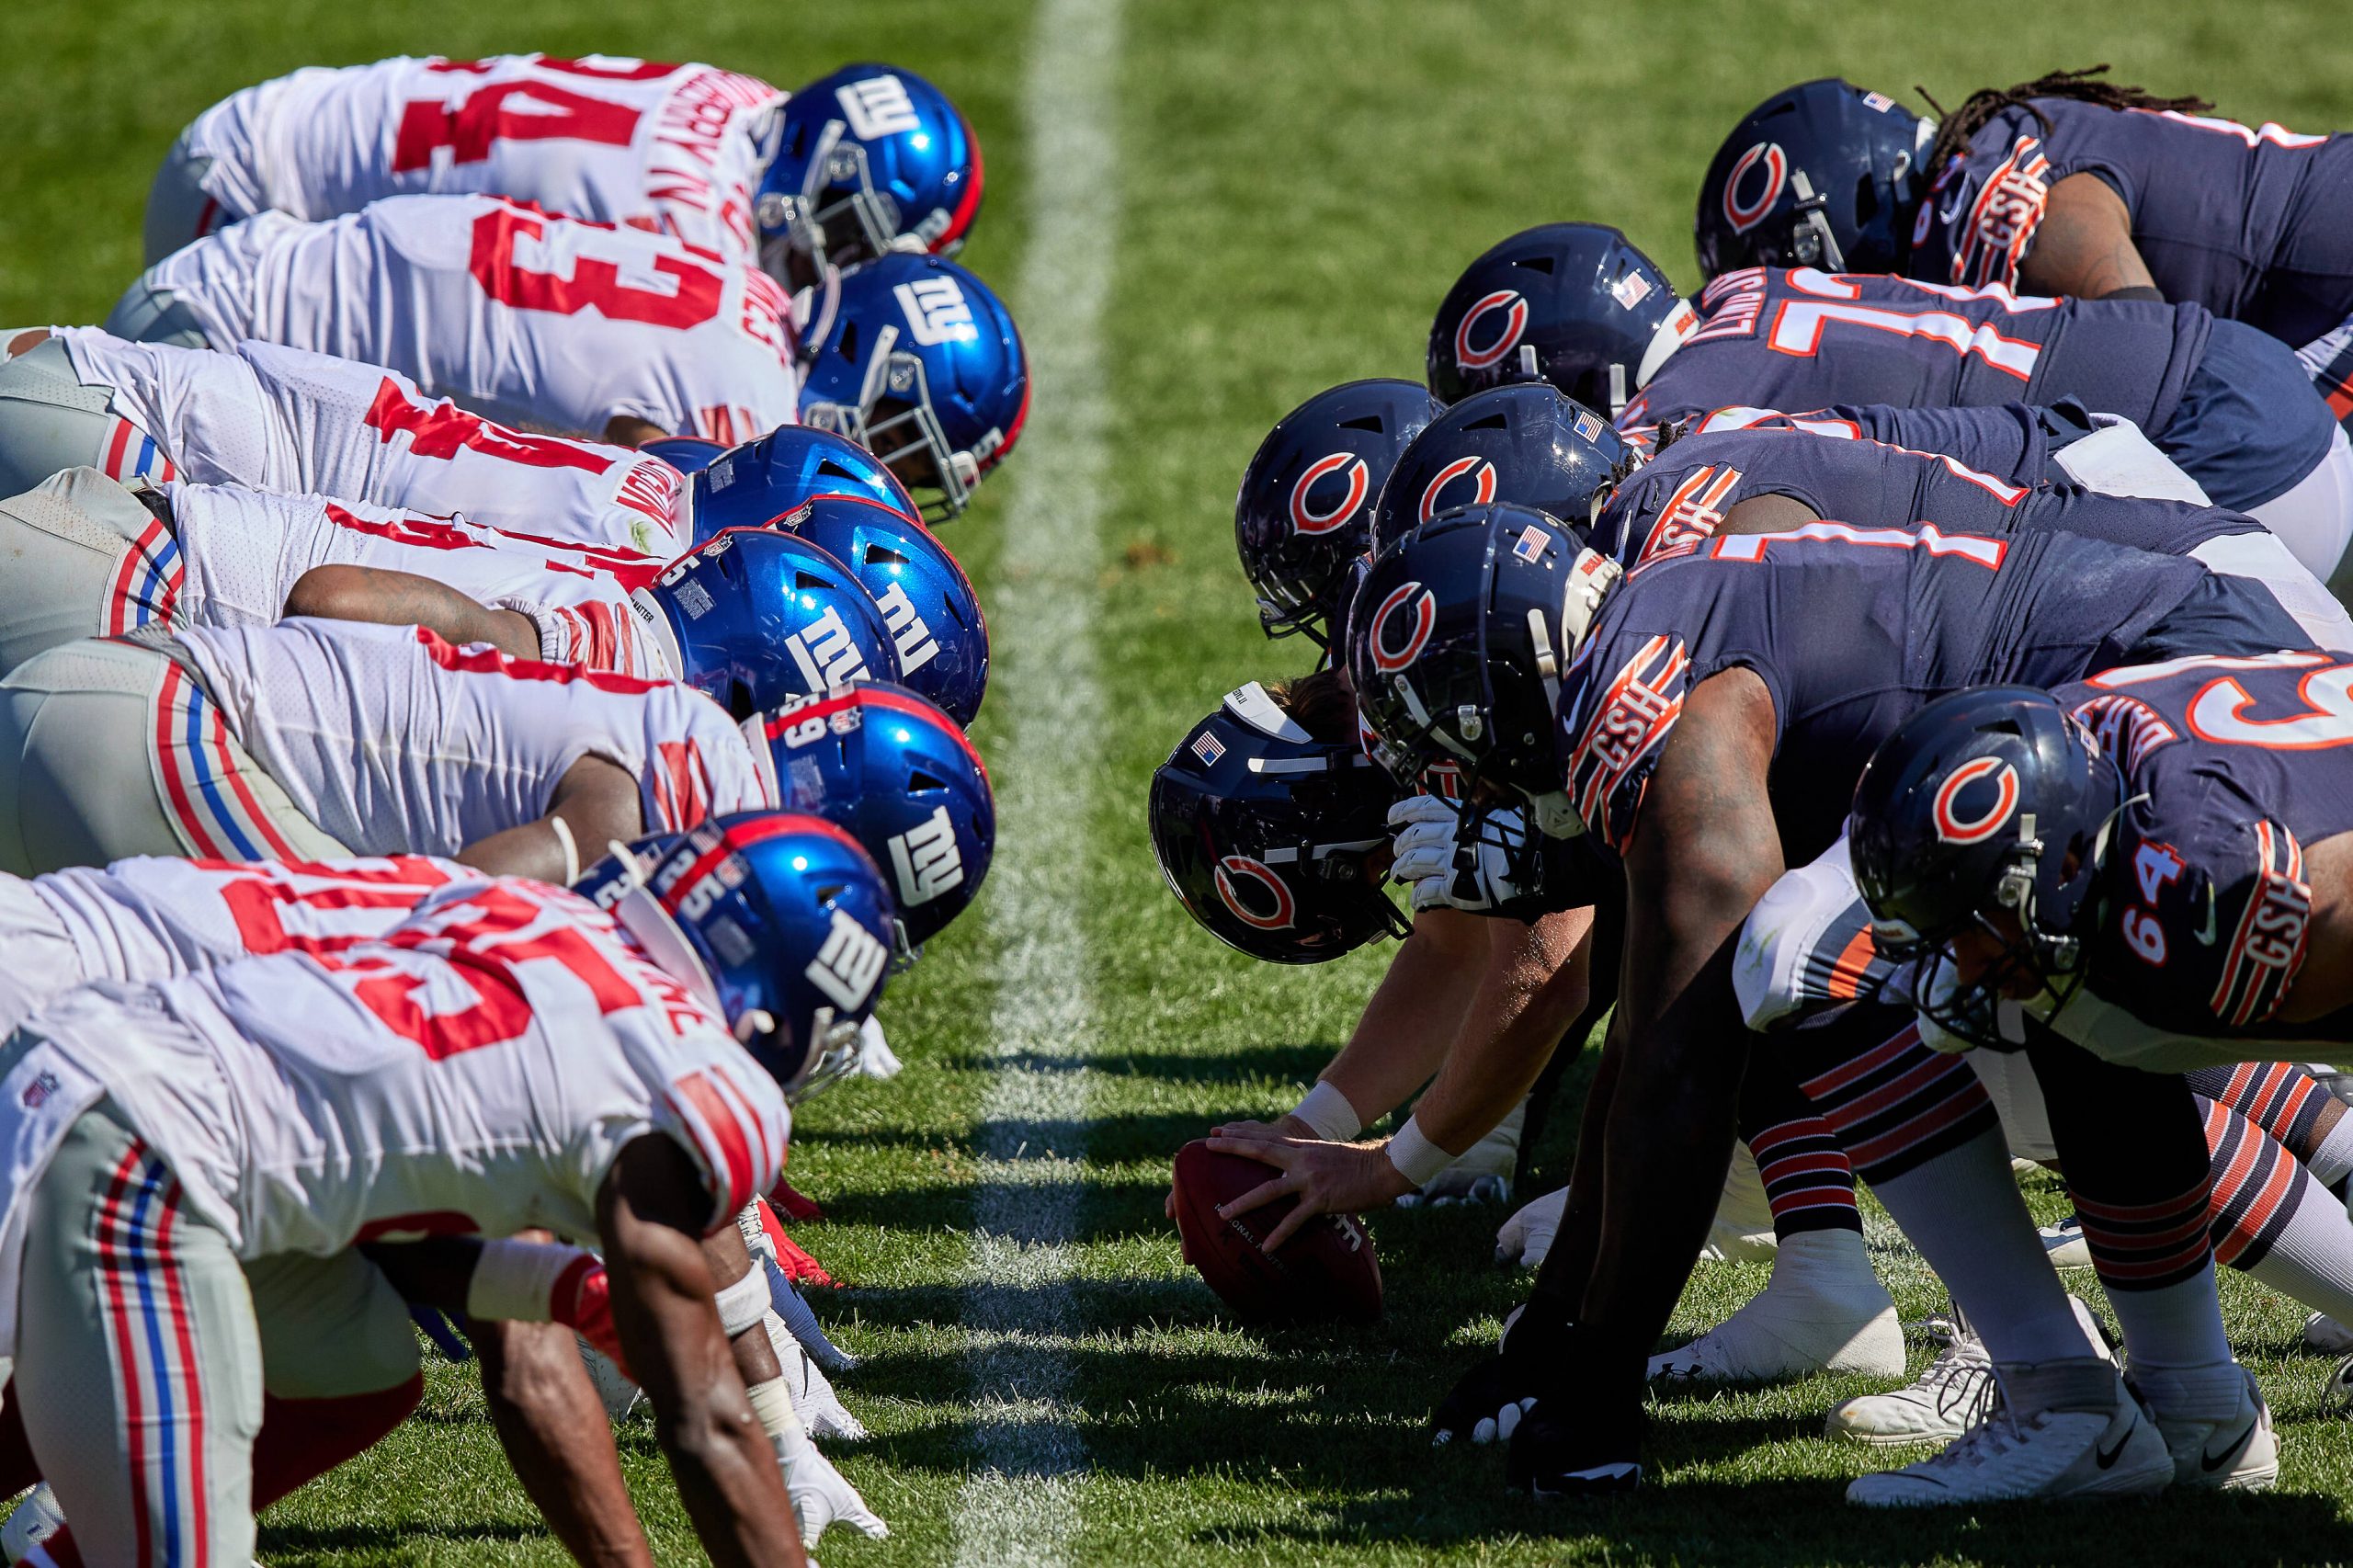 CHICAGO, IL - SEPTEMBER 20: The Chicago Bears offensive line lines up across the New York Giants defensive line at the l